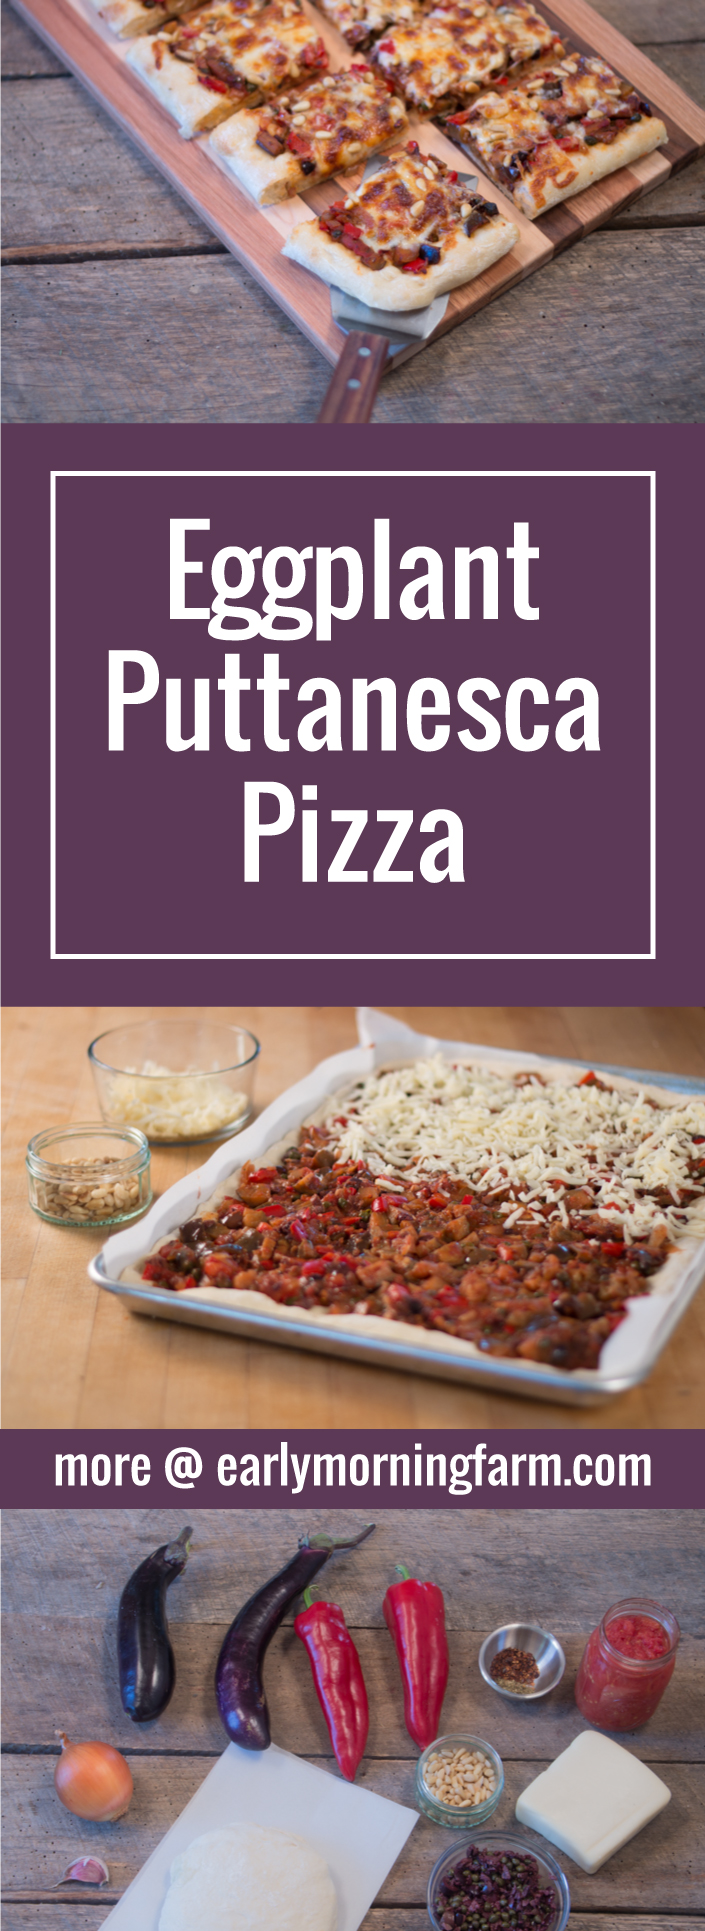 A thick, satisfying pizza with an eggplant puttanesca sauce.